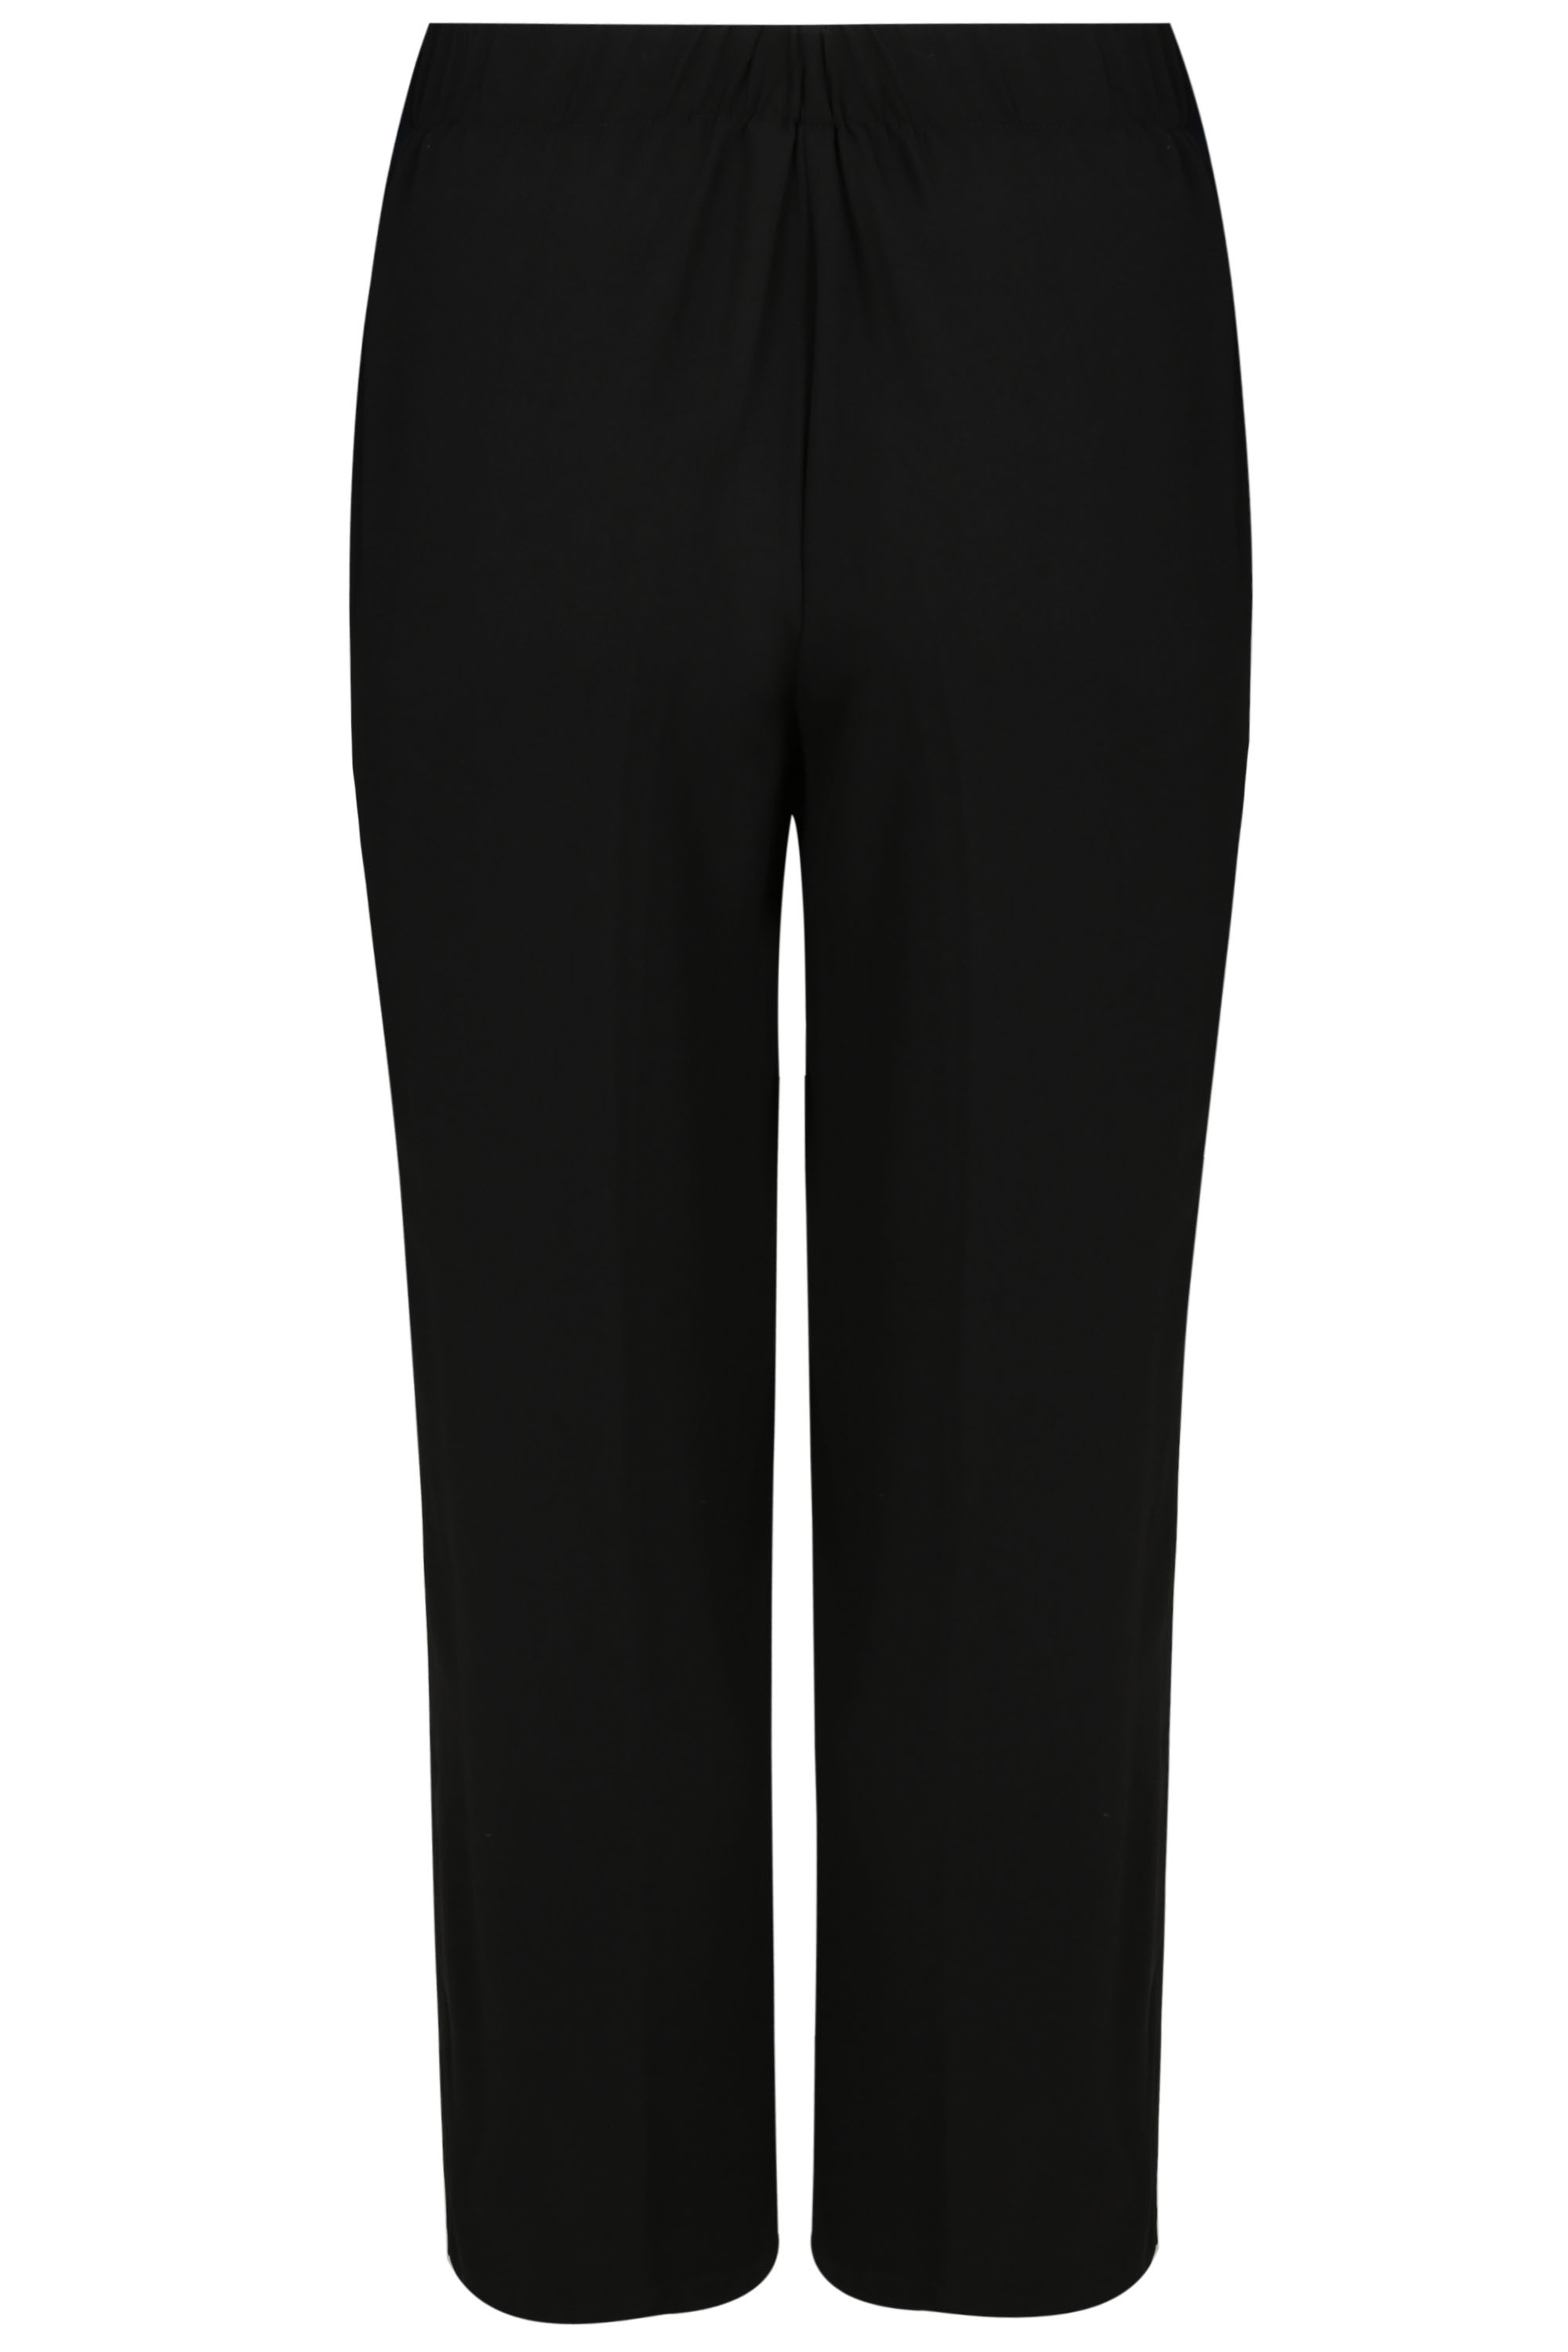 Black Wide Leg Trousers With Ribbon Waist plus Size 16 to 32